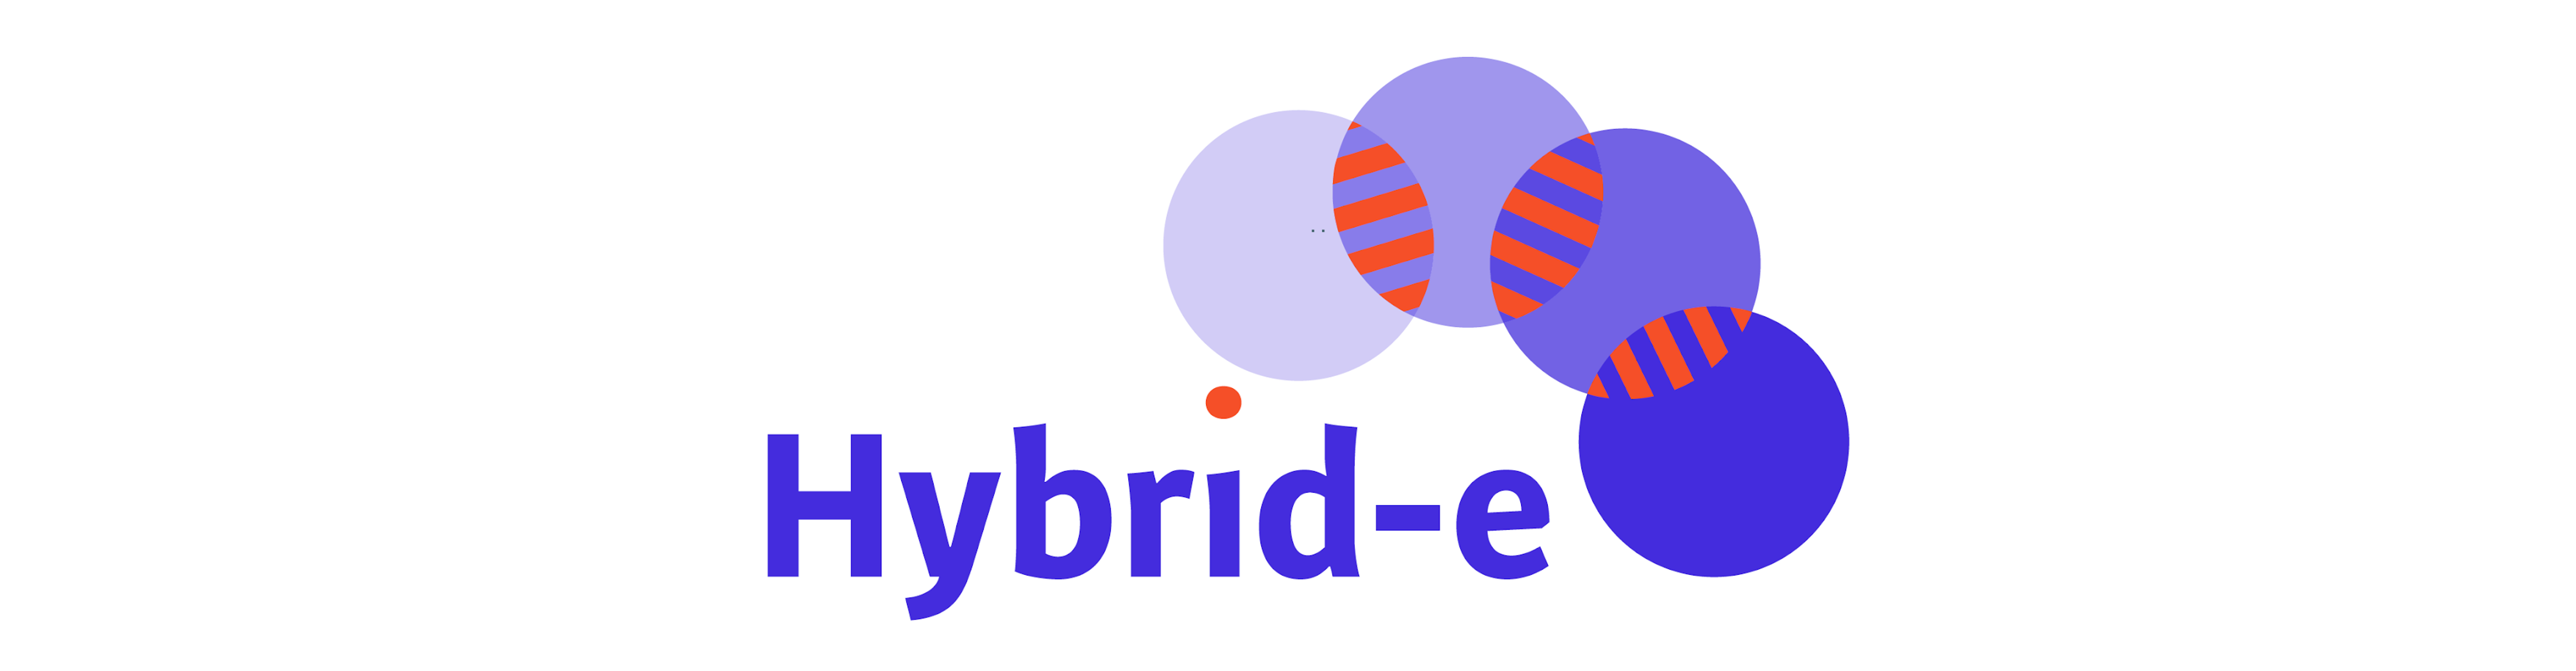 Hybrid-e: New ERASMUS+ project for blended learning support 